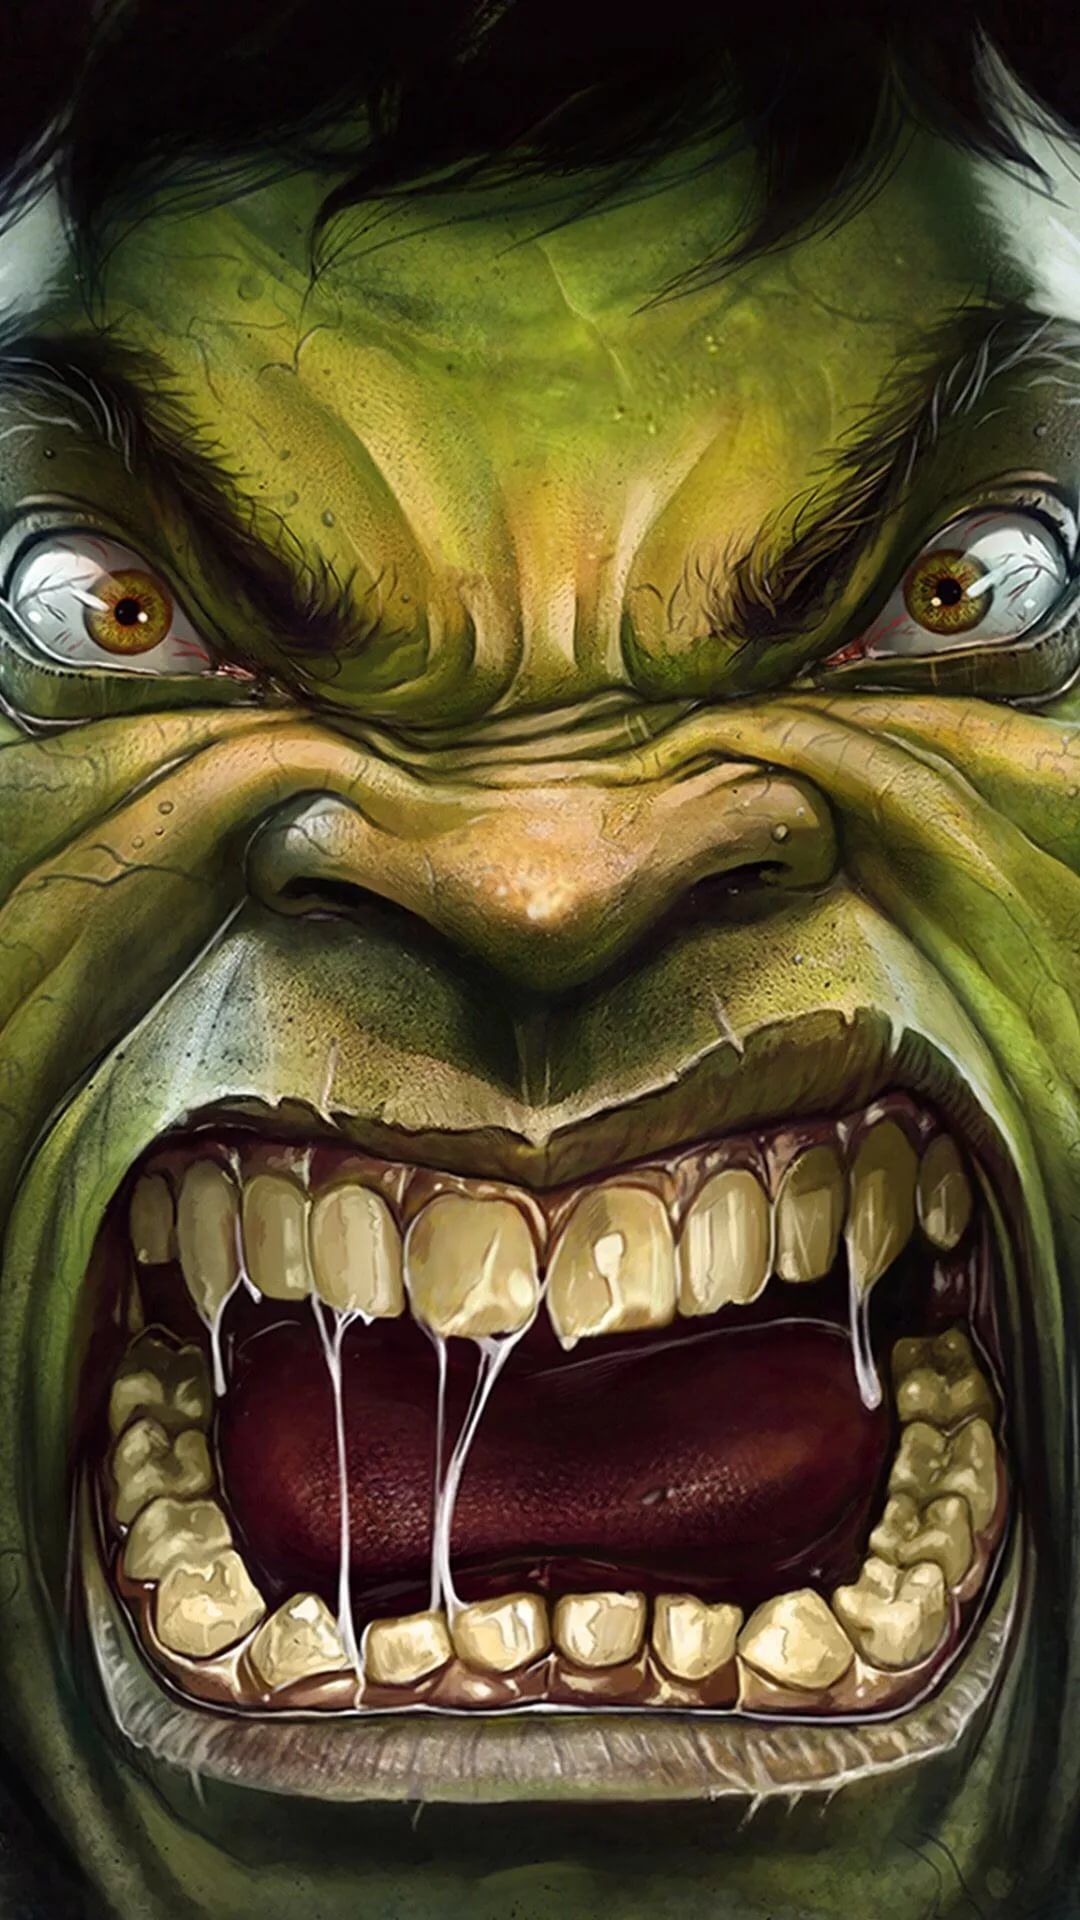 Hulk For Android Wallpapers - Wallpaper Cave